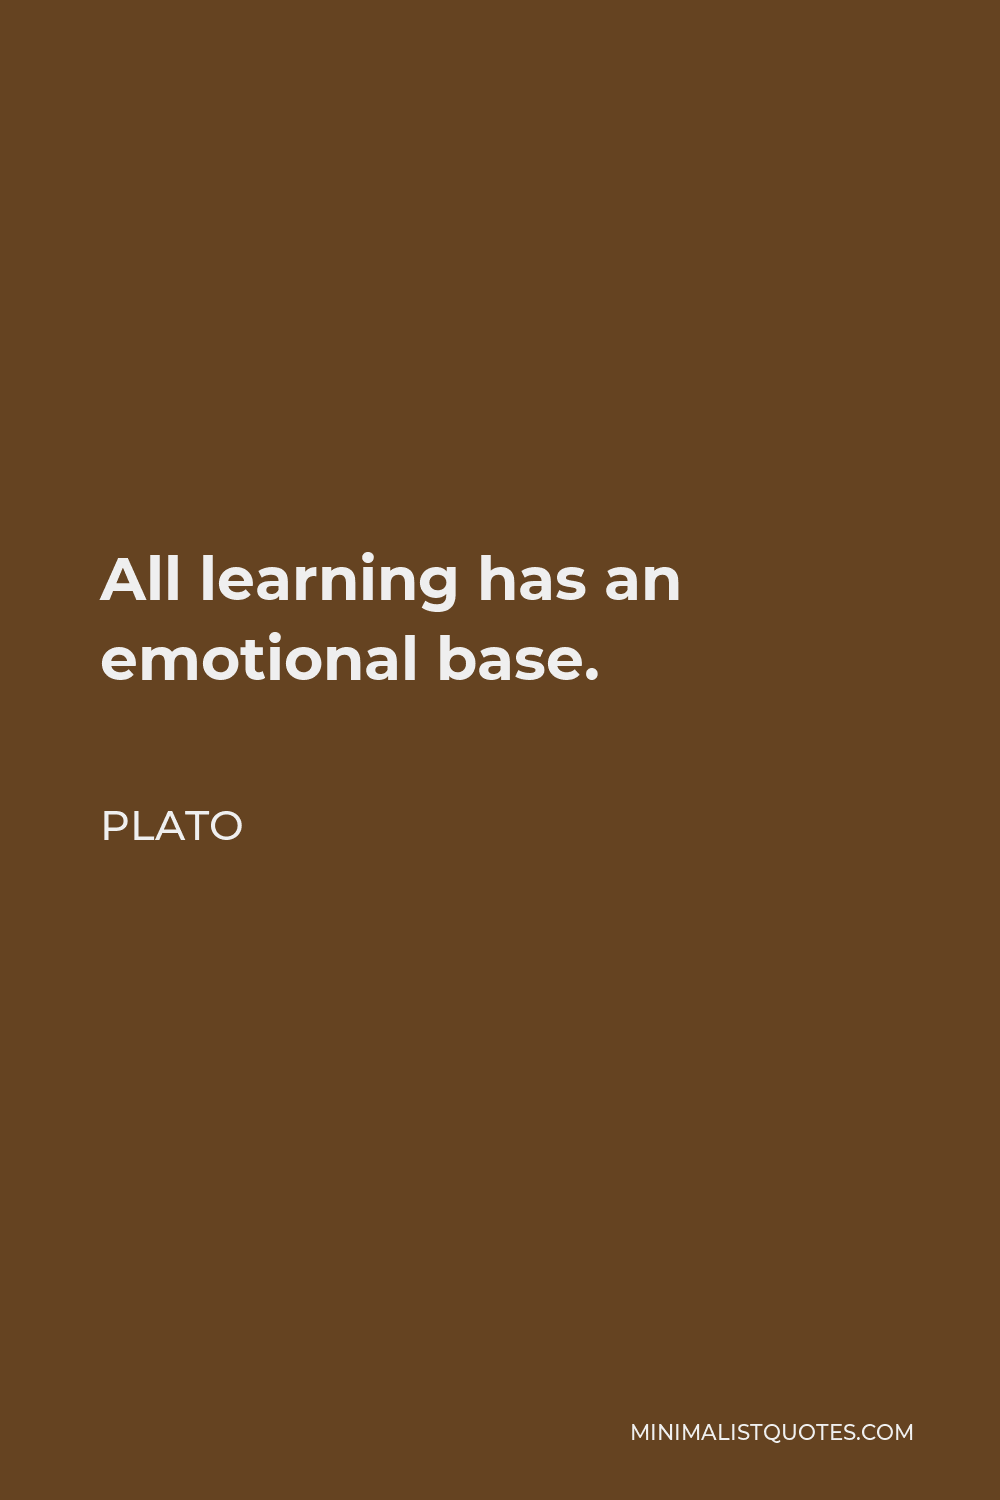 Plato Quote - All learning has an emotional base.